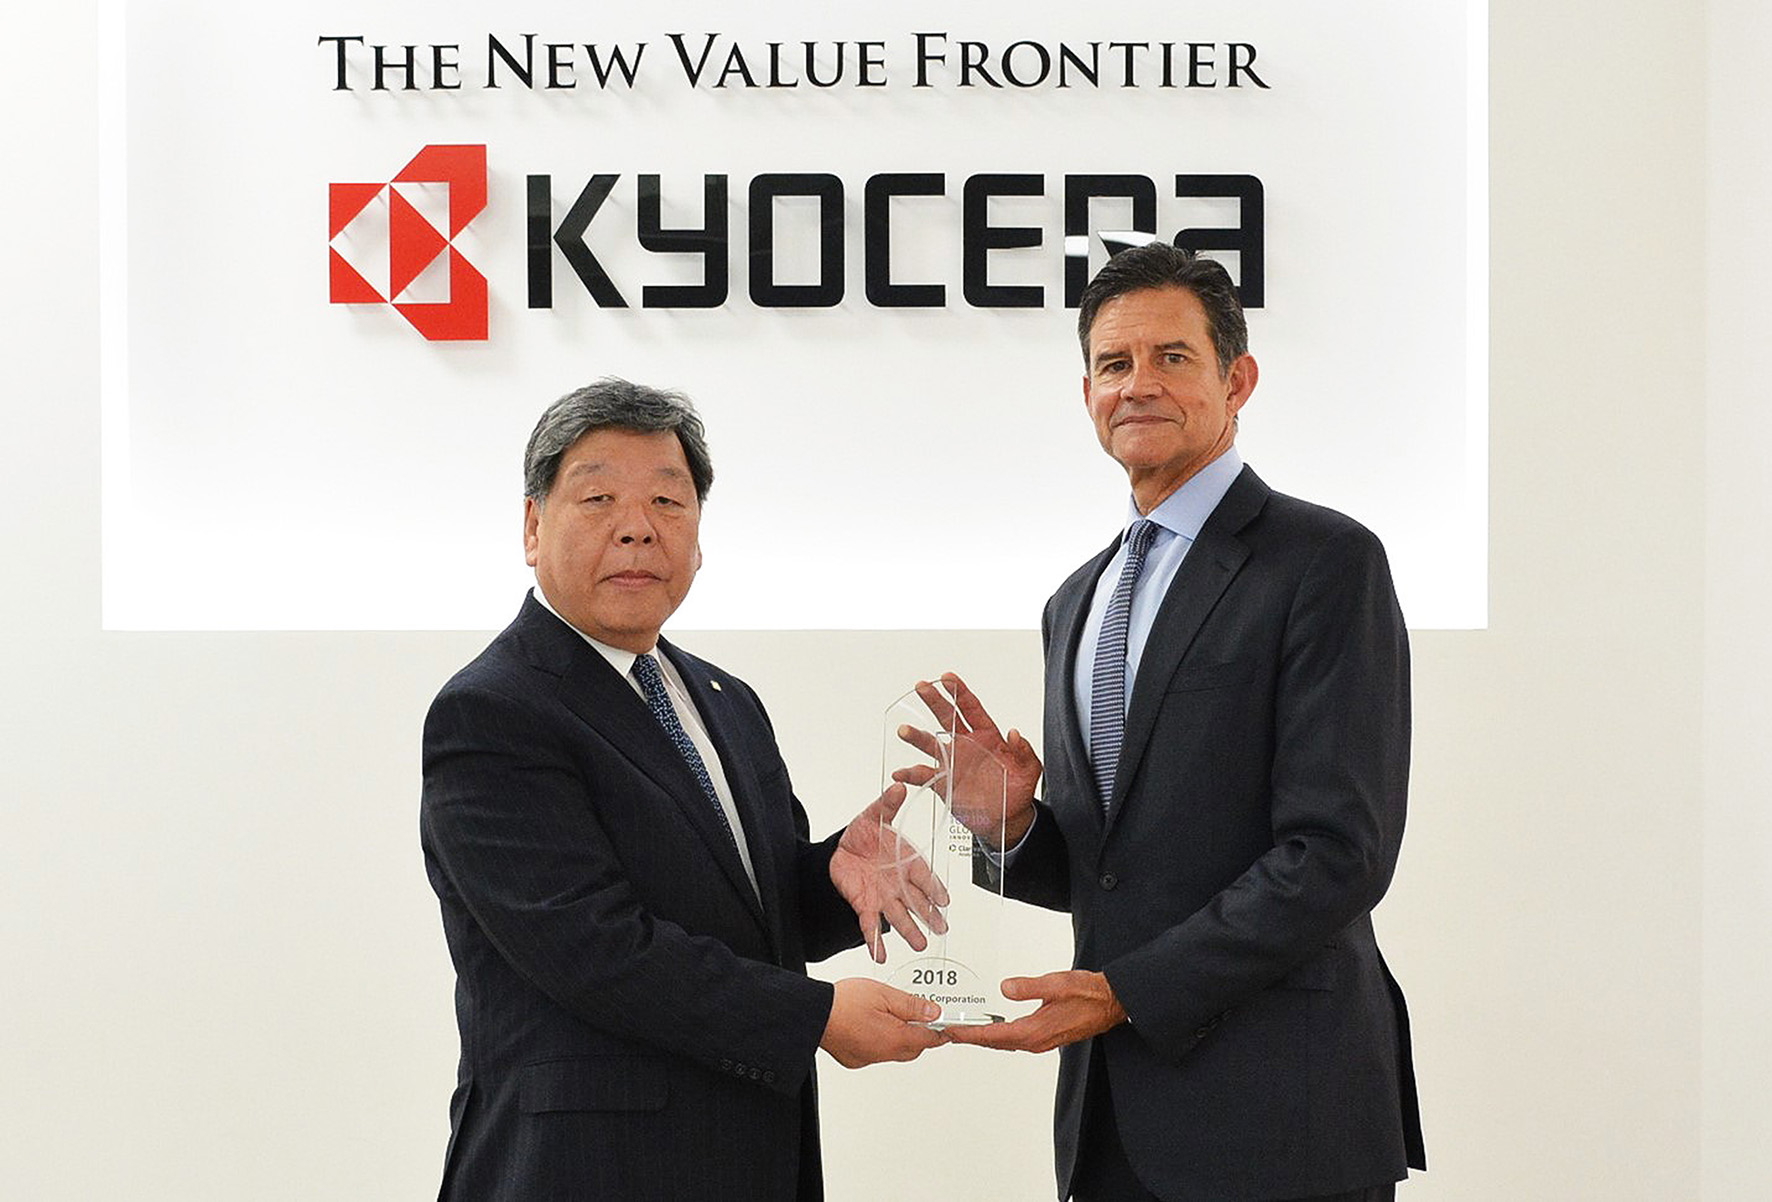 kyocera_named_among_derwent_top_100_global_innovators_by_clarivate_analytics.-cps-32211-image.cpsarticle.jpg